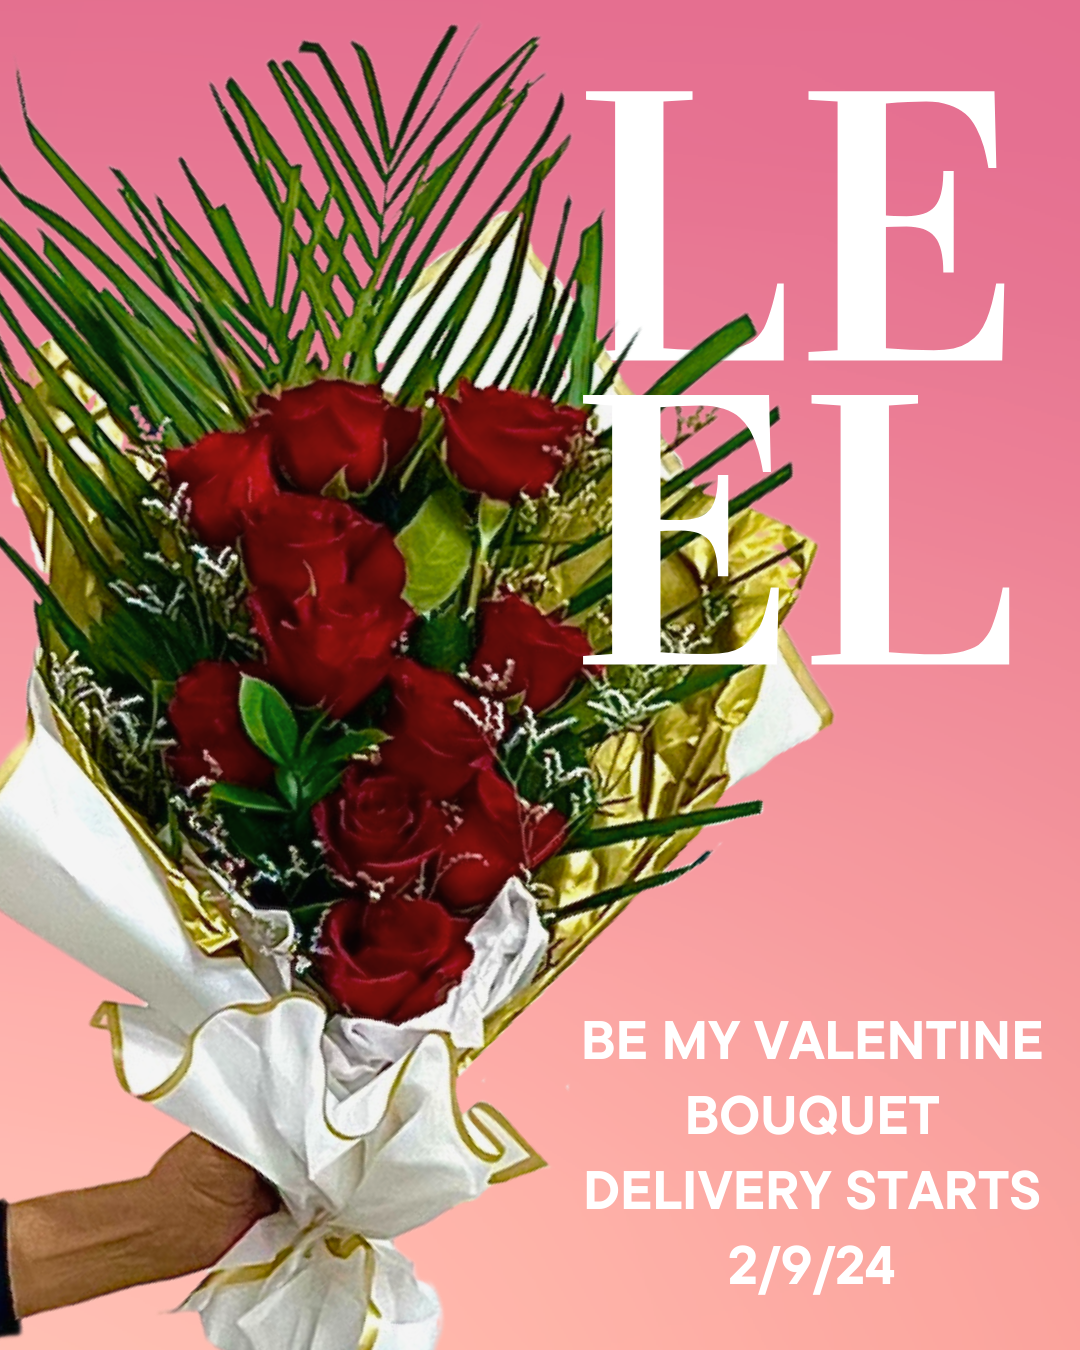 Be My Valentine Bouquet - LE EL New York